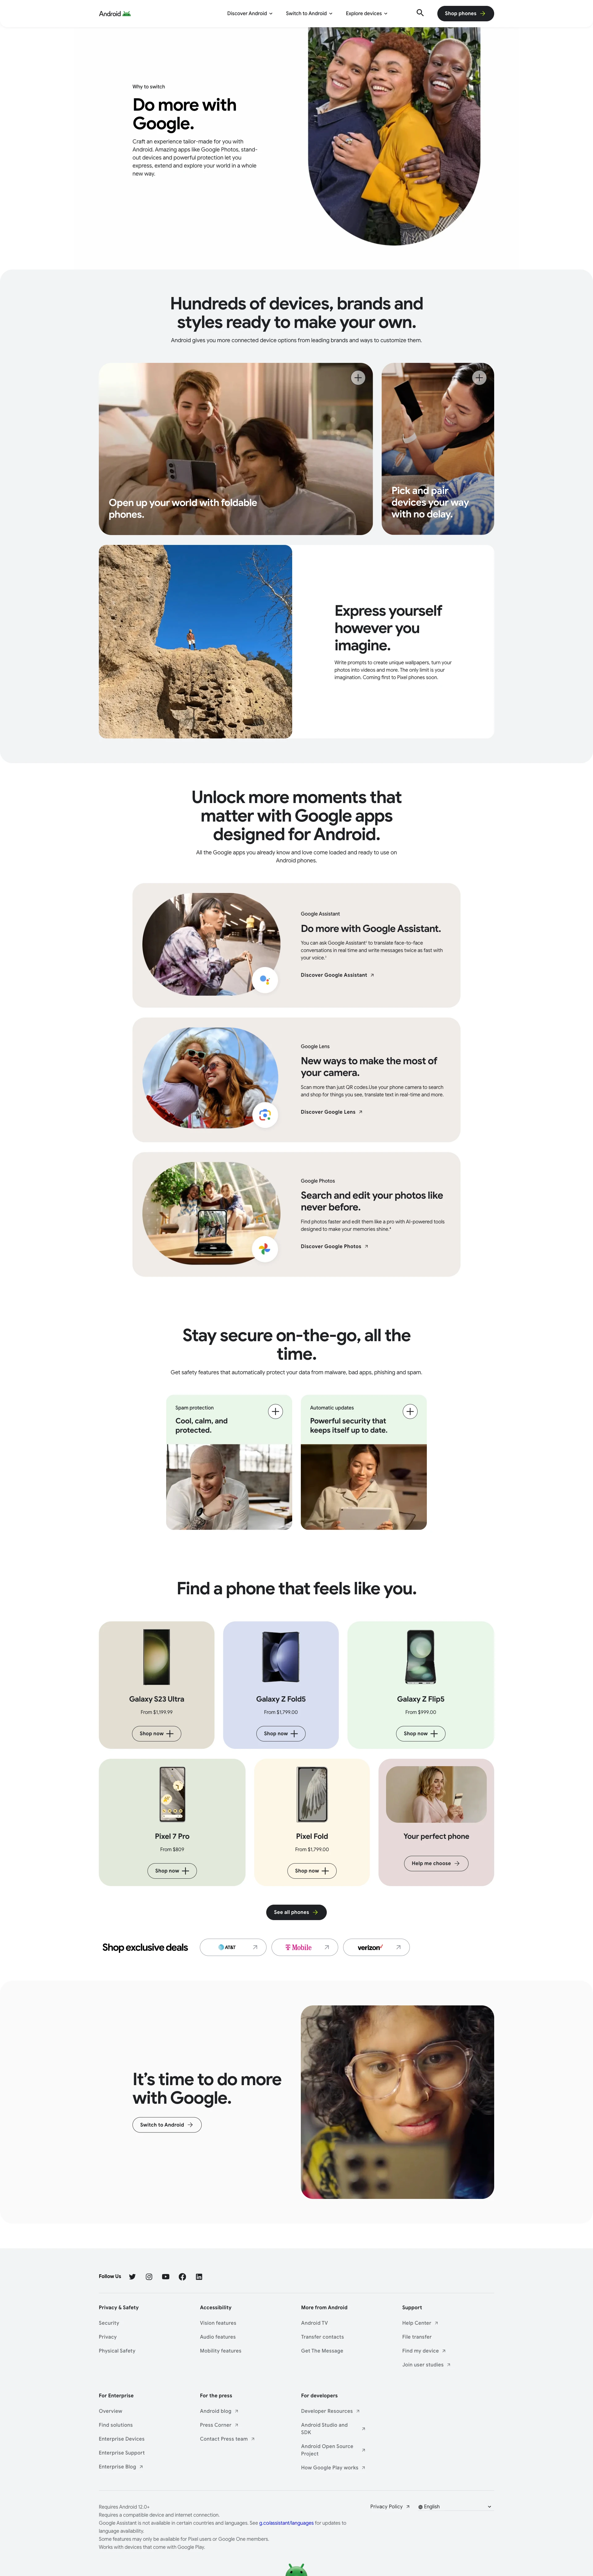 Android 14 Landing Page Example: Discover more about Android & learn how our devices can help you Do more with Google with hyper connectivity, powerful protection, & Google apps.